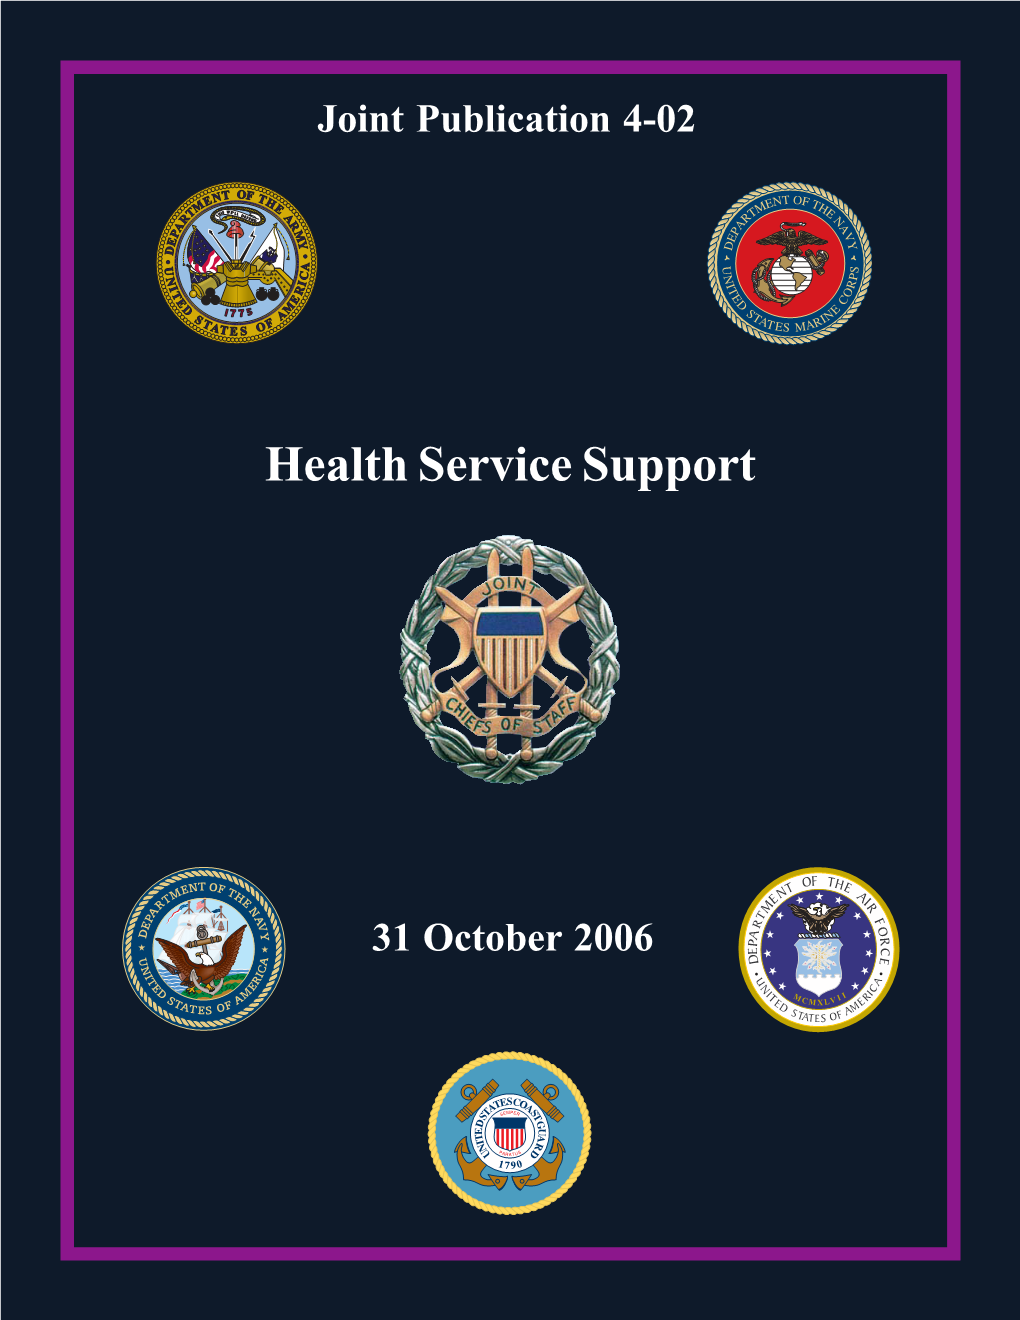 Joint Pub 4-02:Health Service Support. JP4-02 061031